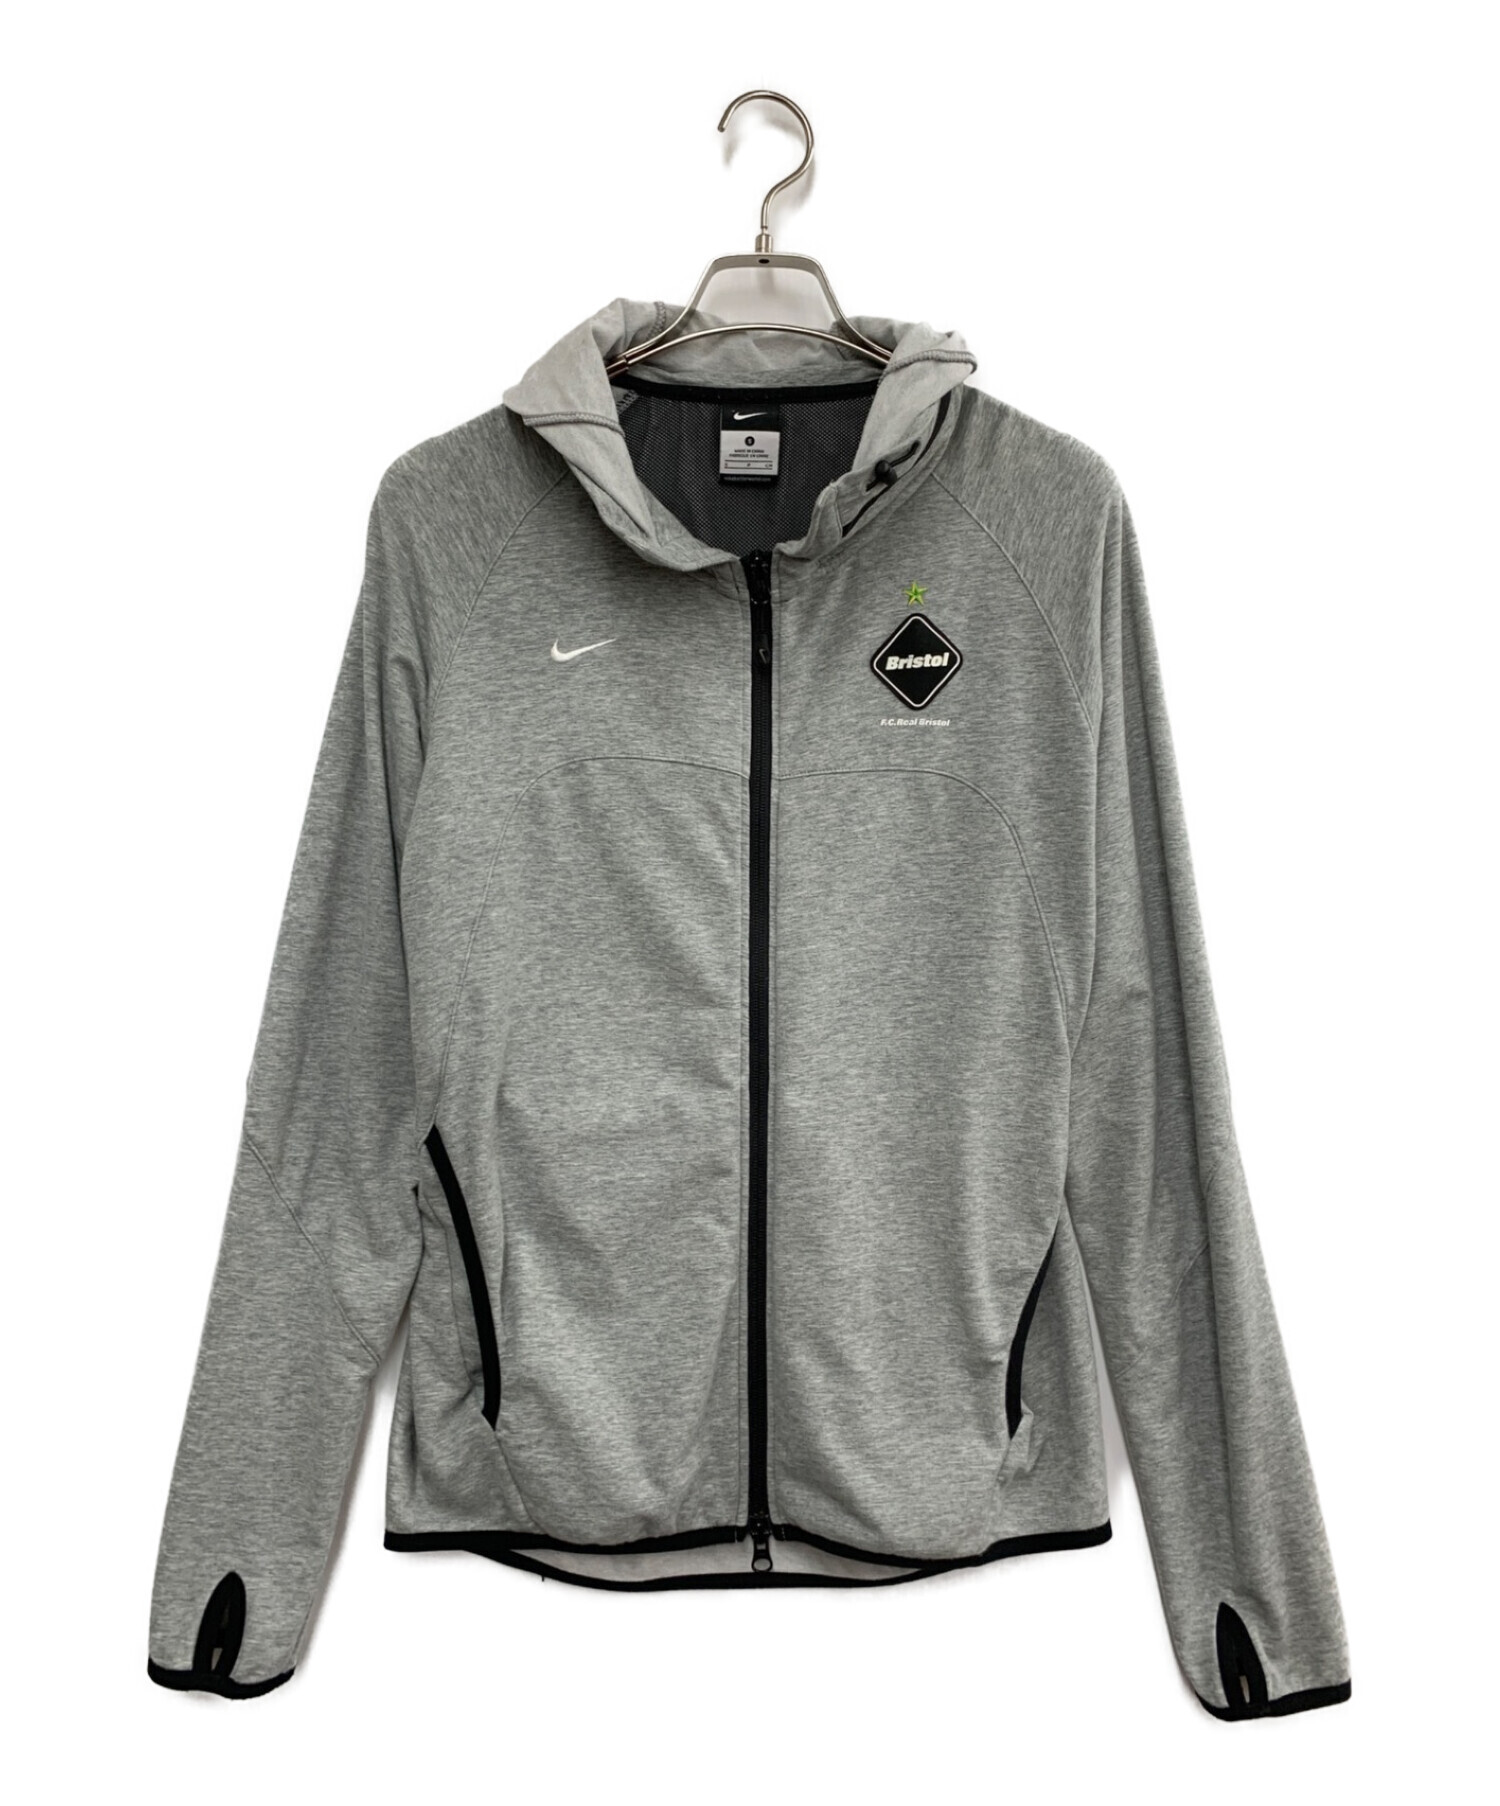 2015AW FCRB NIKE sweat hoodie Size M